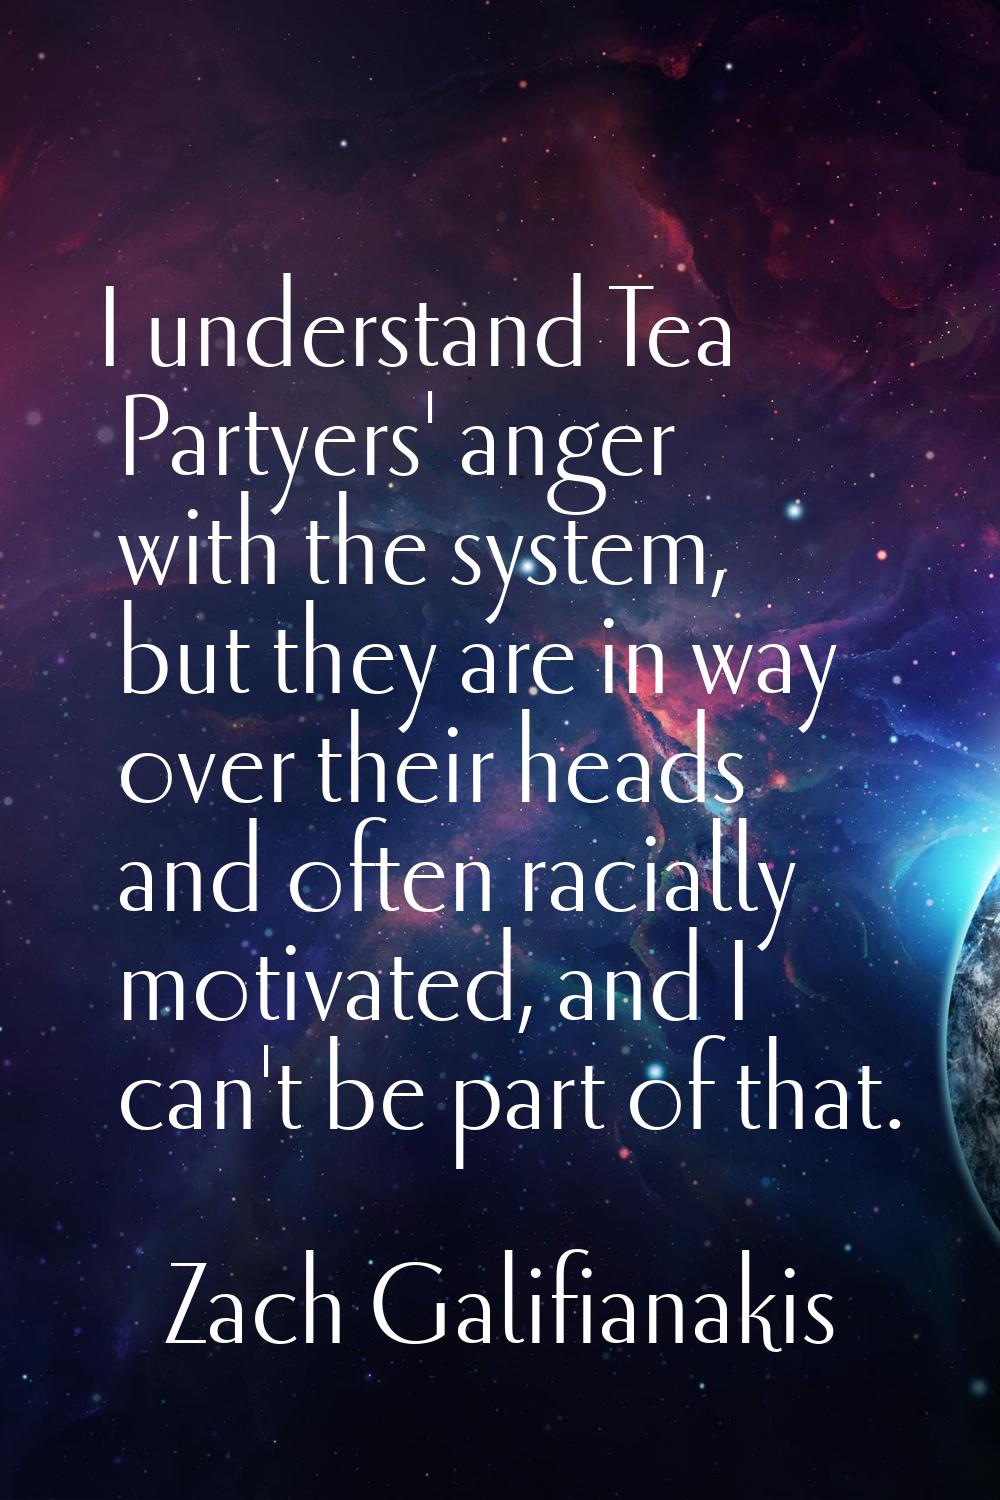 I understand Tea Partyers' anger with the system, but they are in way over their heads and often ra